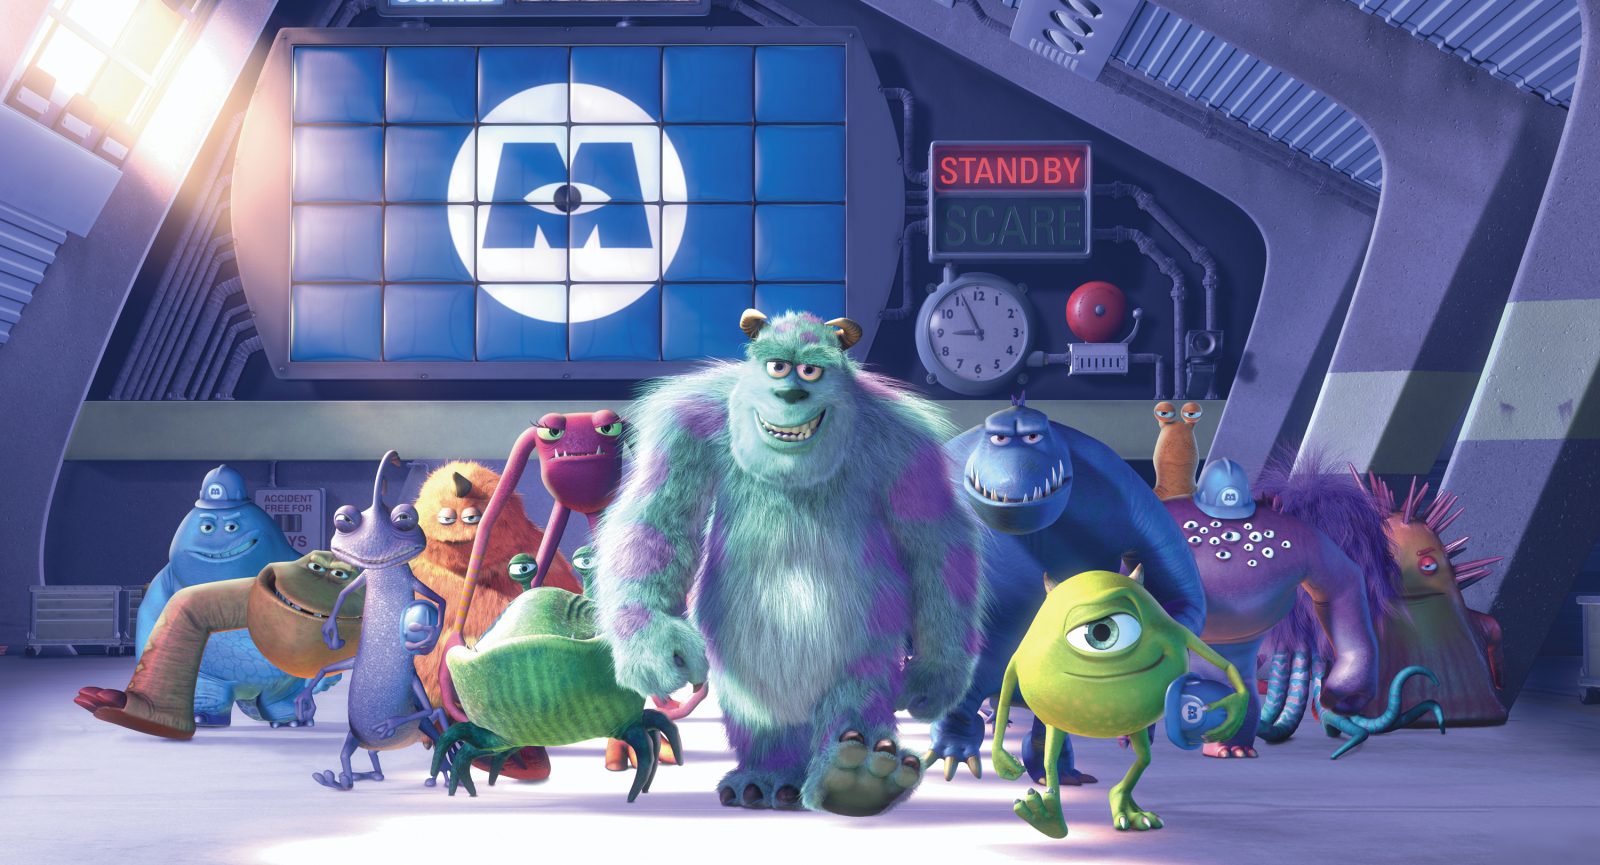 Which Three Pixar Characters Are You A Combo Of? monsters inc 3000x1622 animation pixar 126